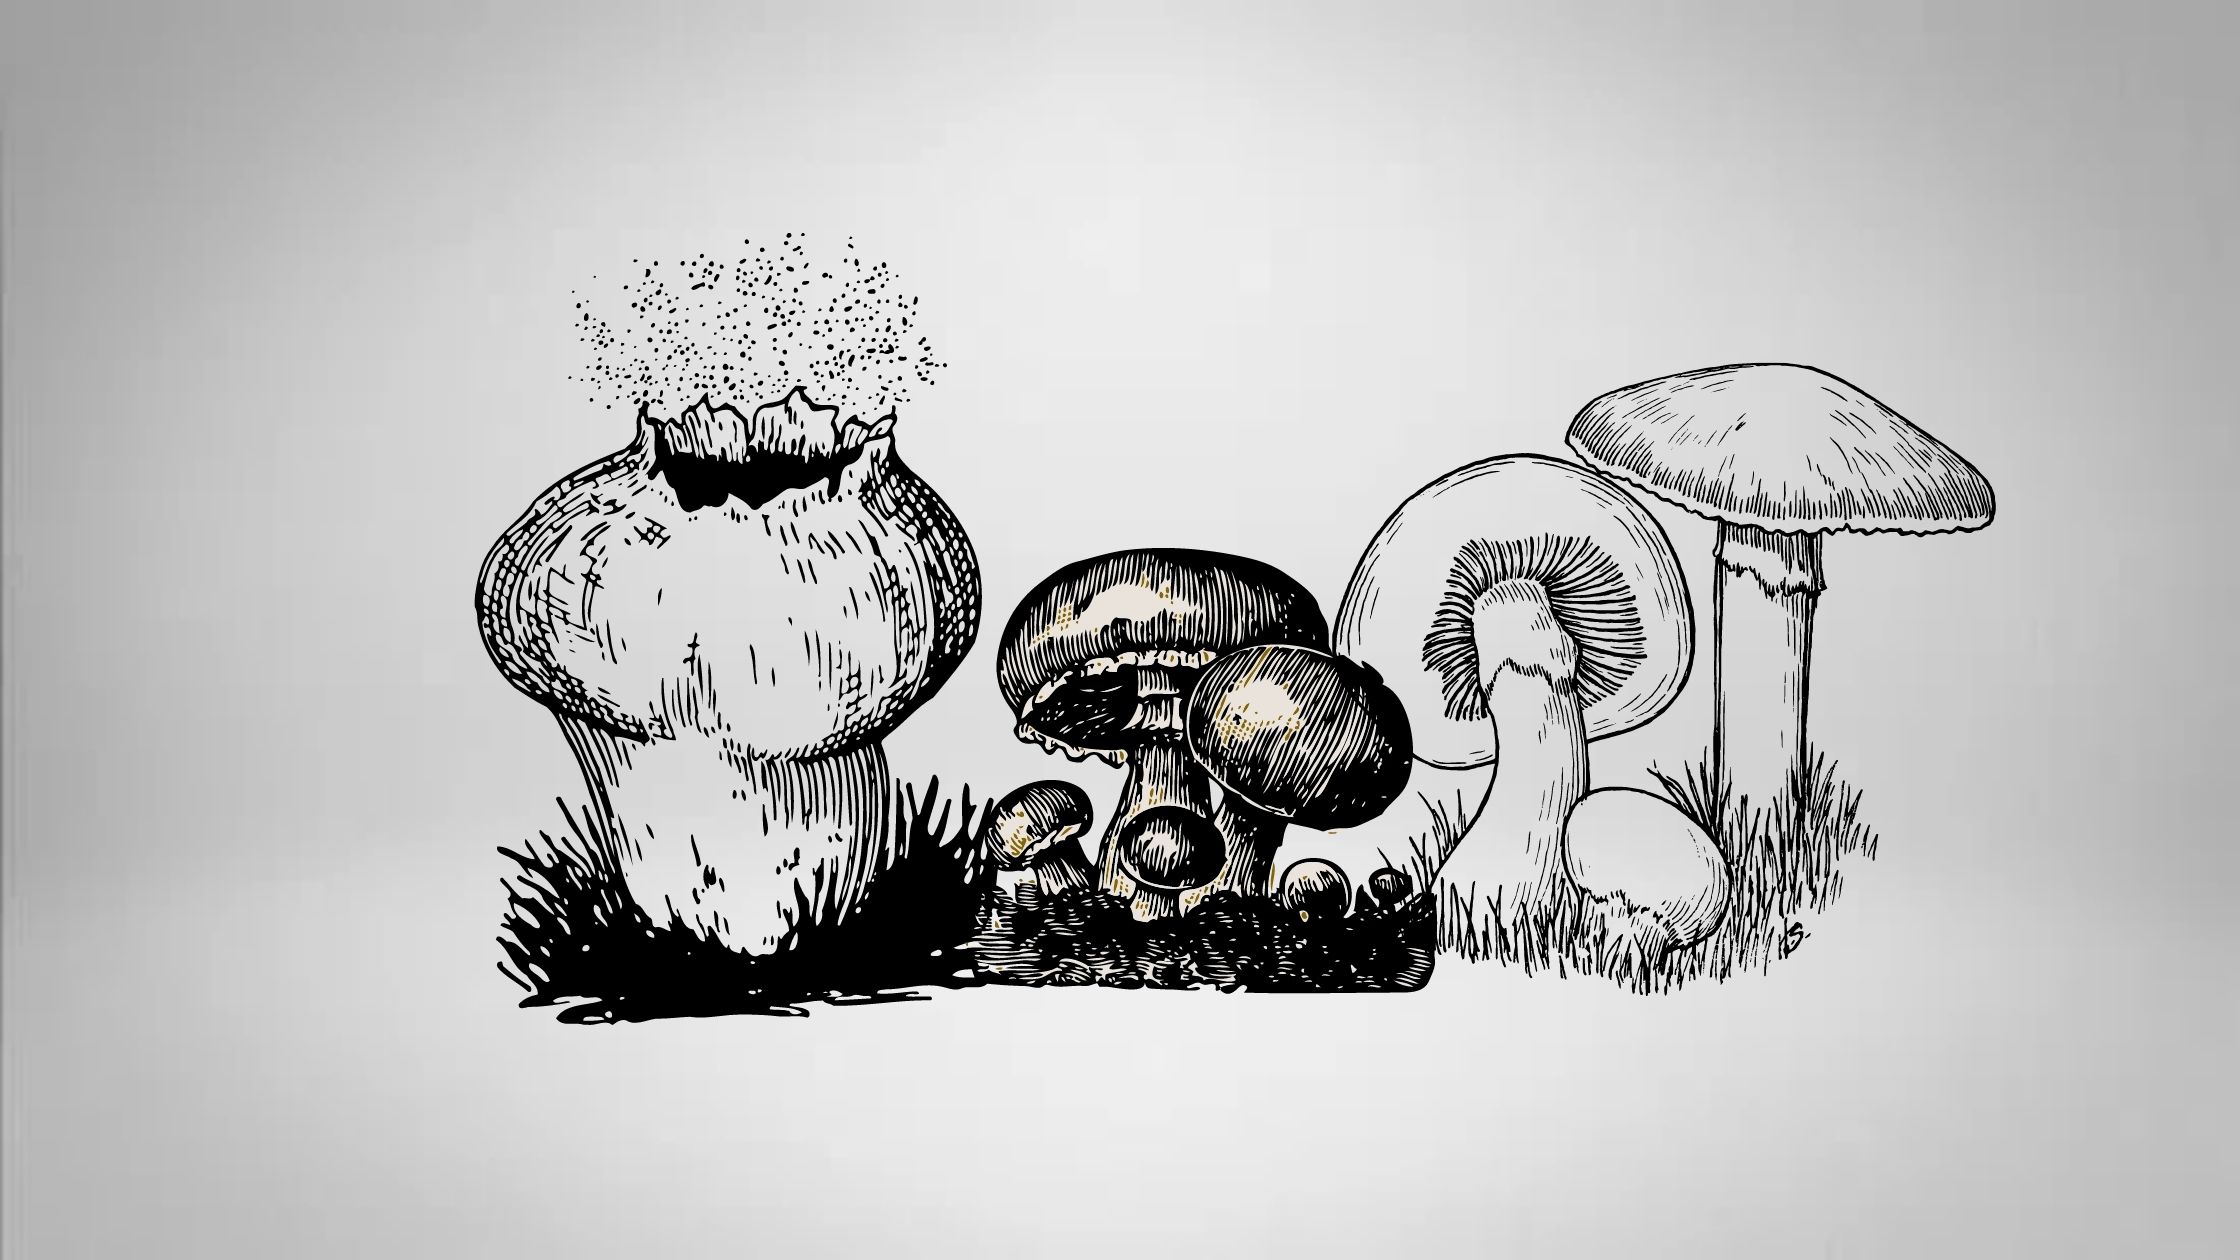 Reproduction of Fungi: Sexual, Asexual and Vegetative Reproduction